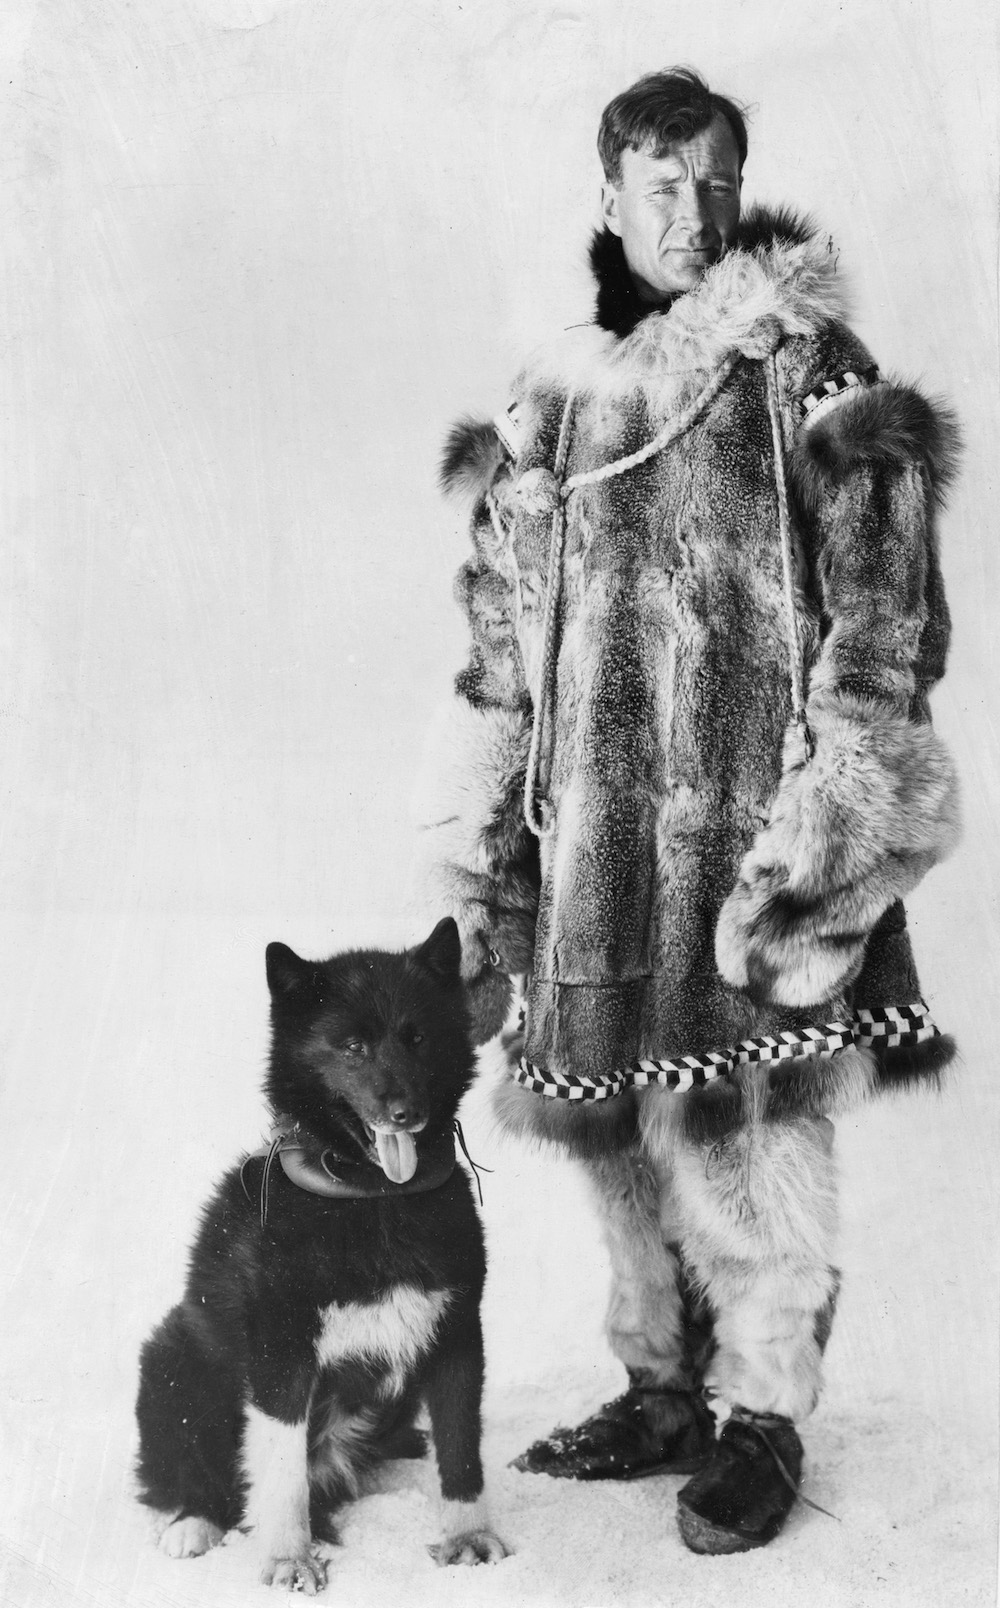 a black and white historical print image of a man on the right with a large animal fur winter coat to brave the harsh alaskan environment. he stands next to a dog on the left that hair pointy ears and a bushy dark coat with a white tuft on his chest. 